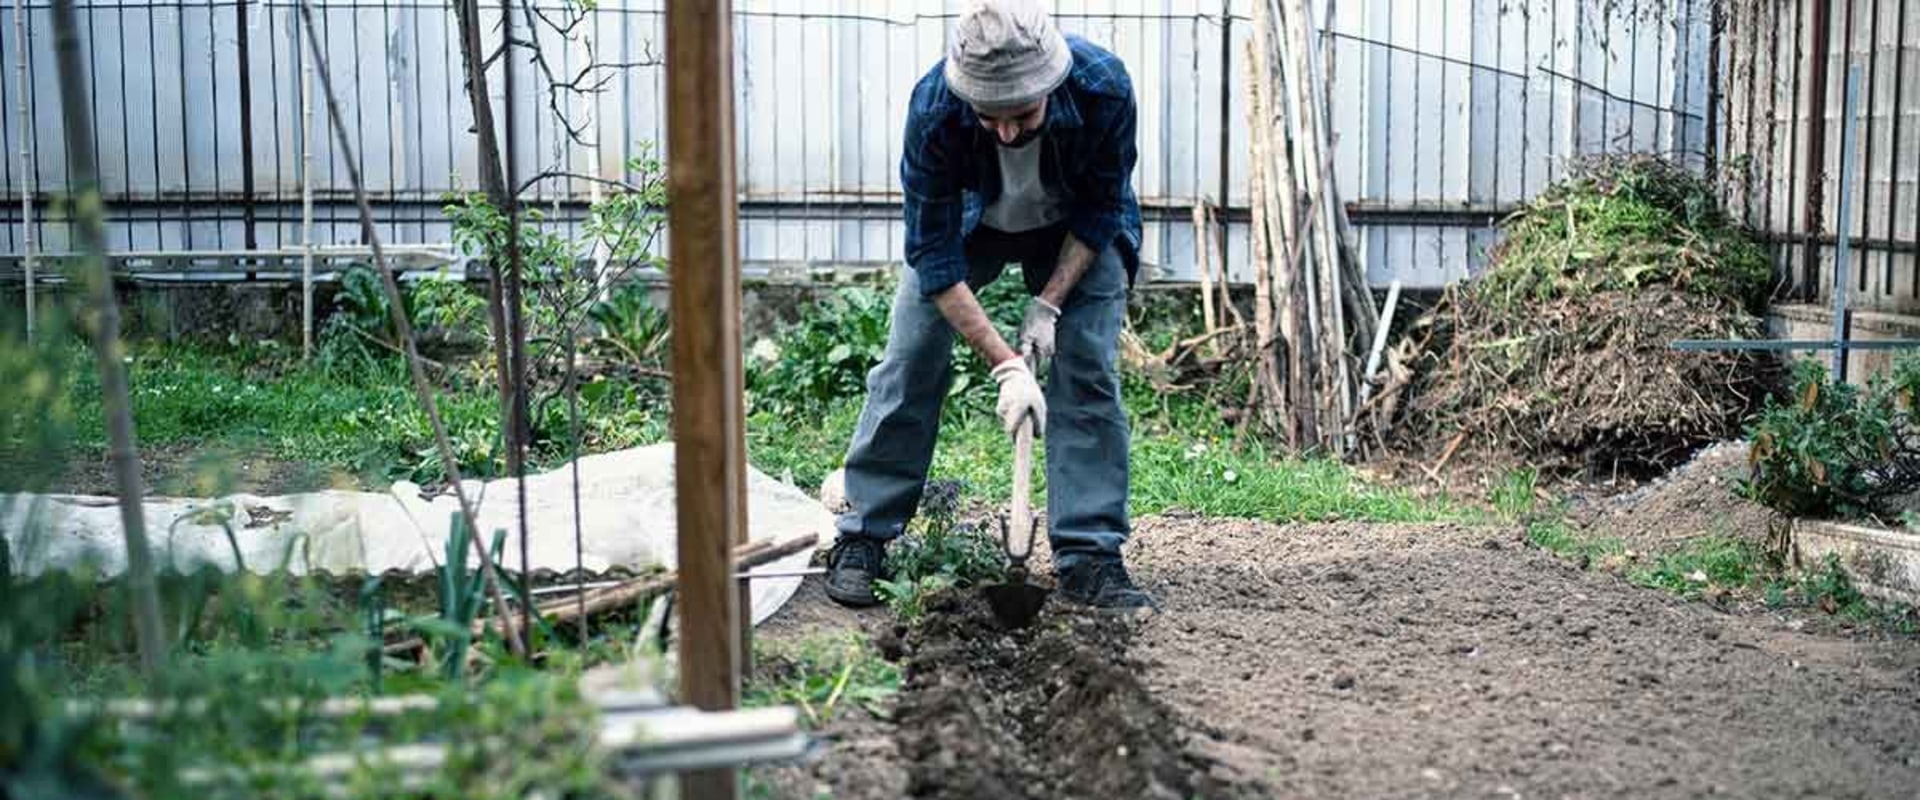 How do you start a garden from scratch in the ground?